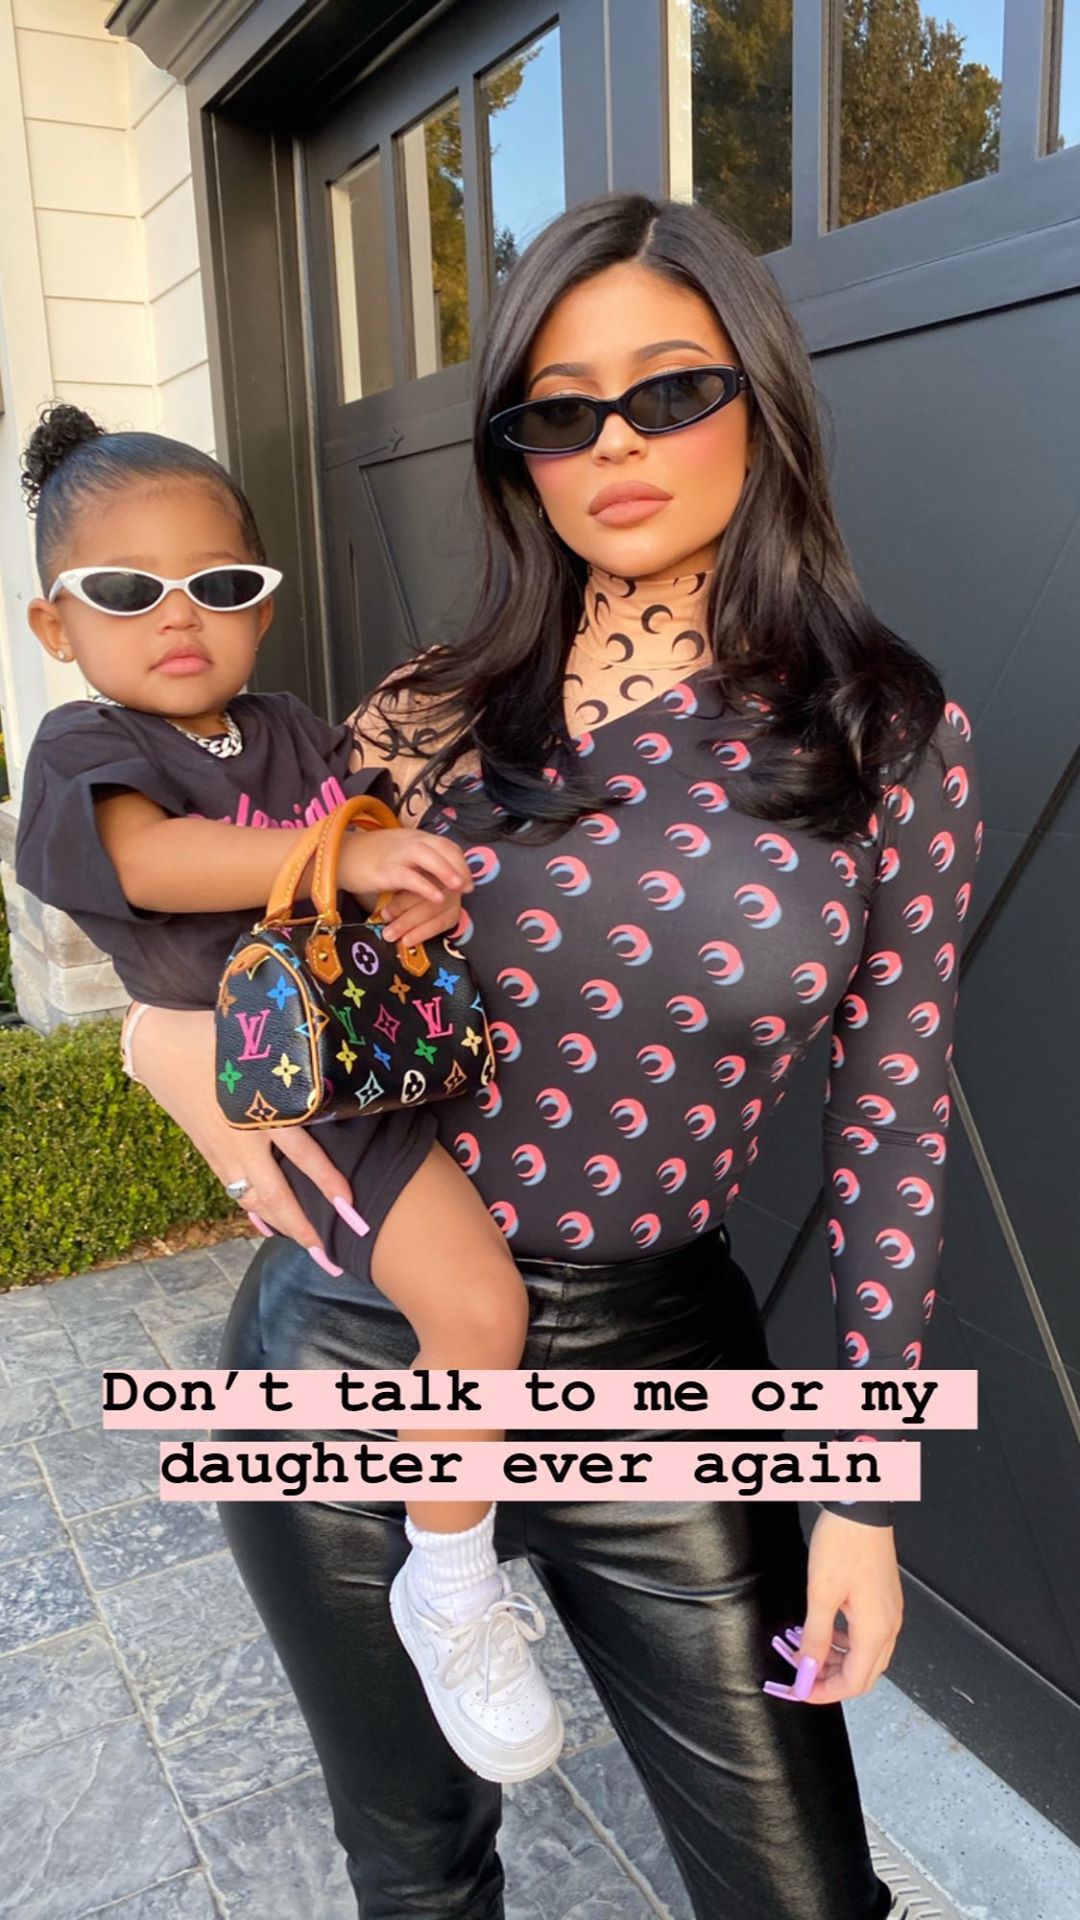 Kylie Jenner and Stormi Webster Wear Matching Sunglasses